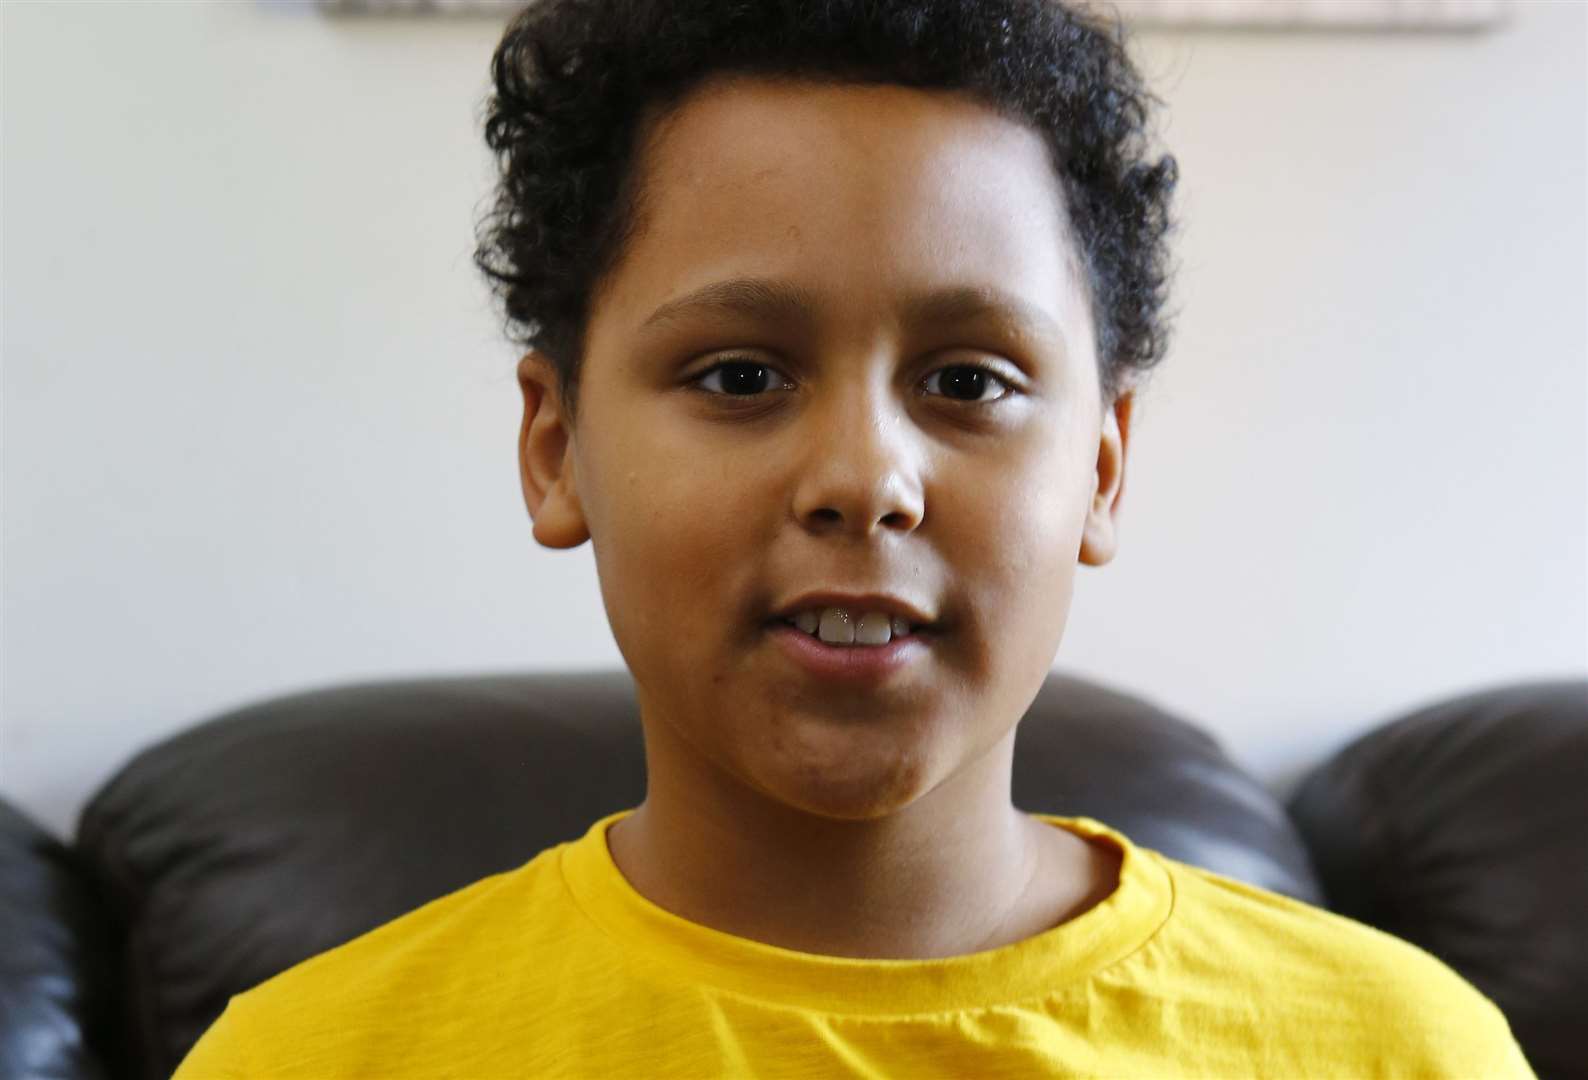 Caleb has been pulled out of school by mum Tyler after racial abuse Picture: Matt Bristow